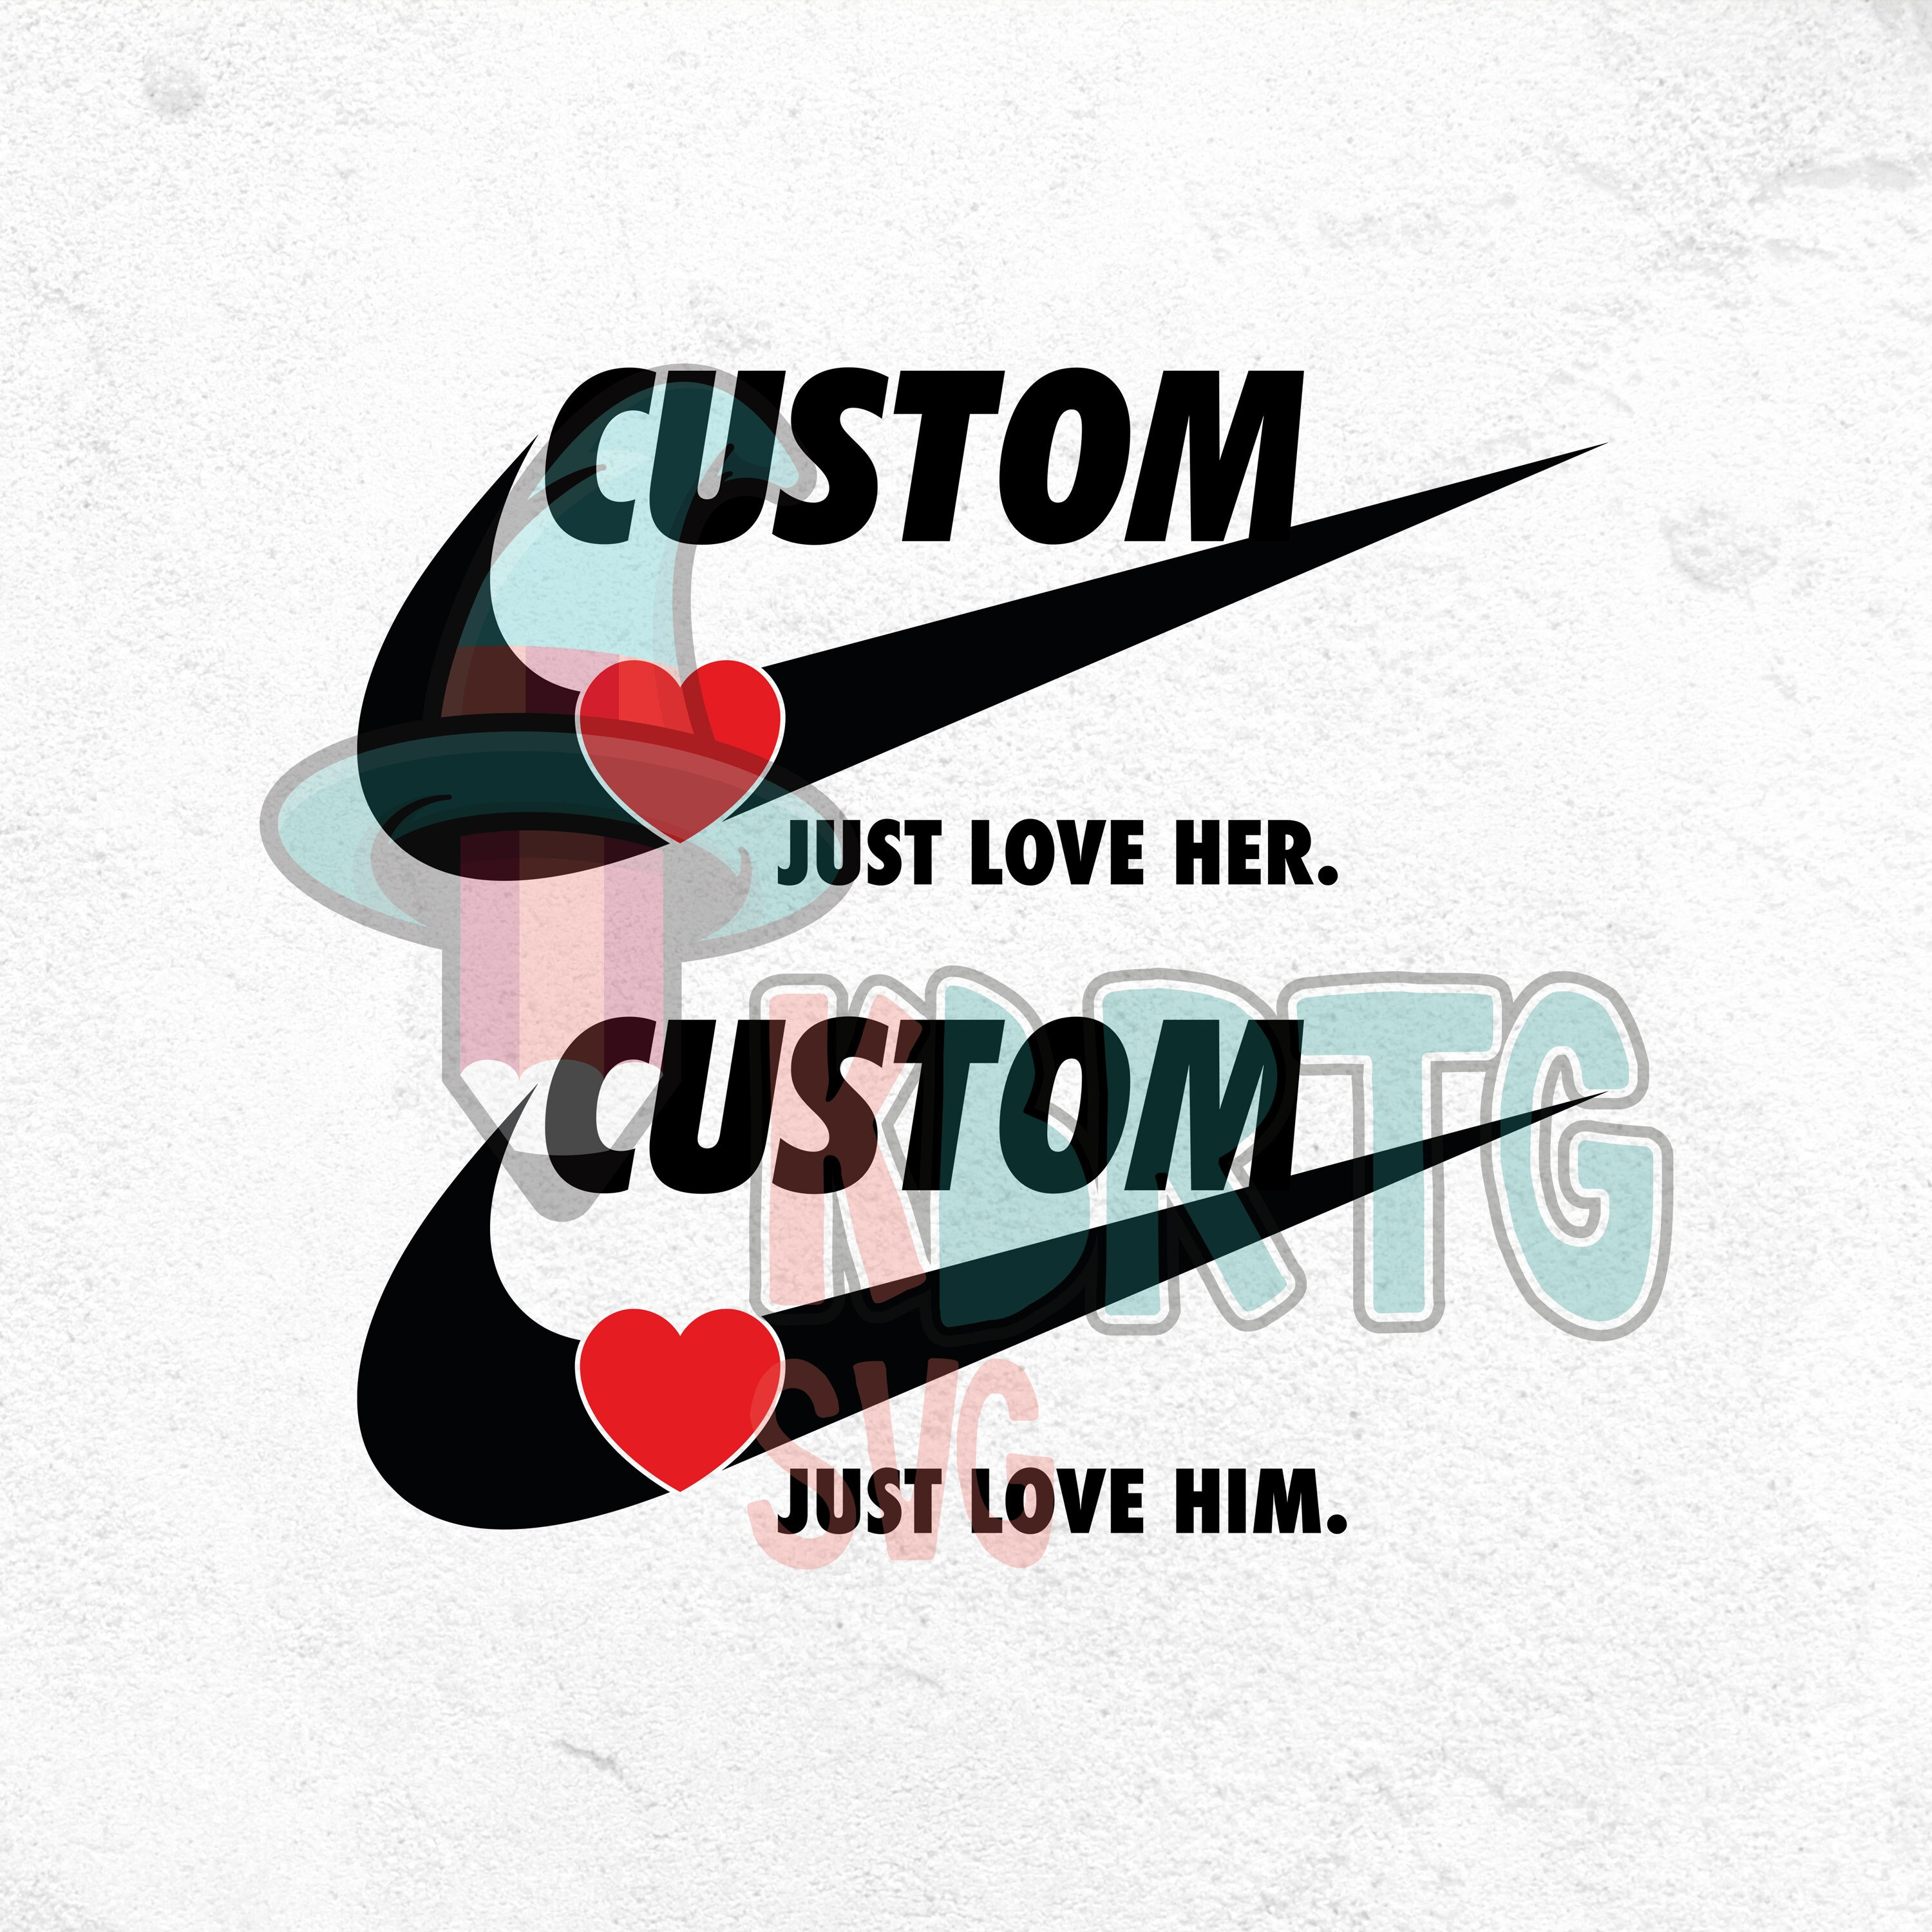 Nike Valentines Swoosh SVG, Nike Heart Valentine SVG, Gift For Valentine's  Day, PNG, DXF, EPS, Cut Files for Cricut and Silhouette